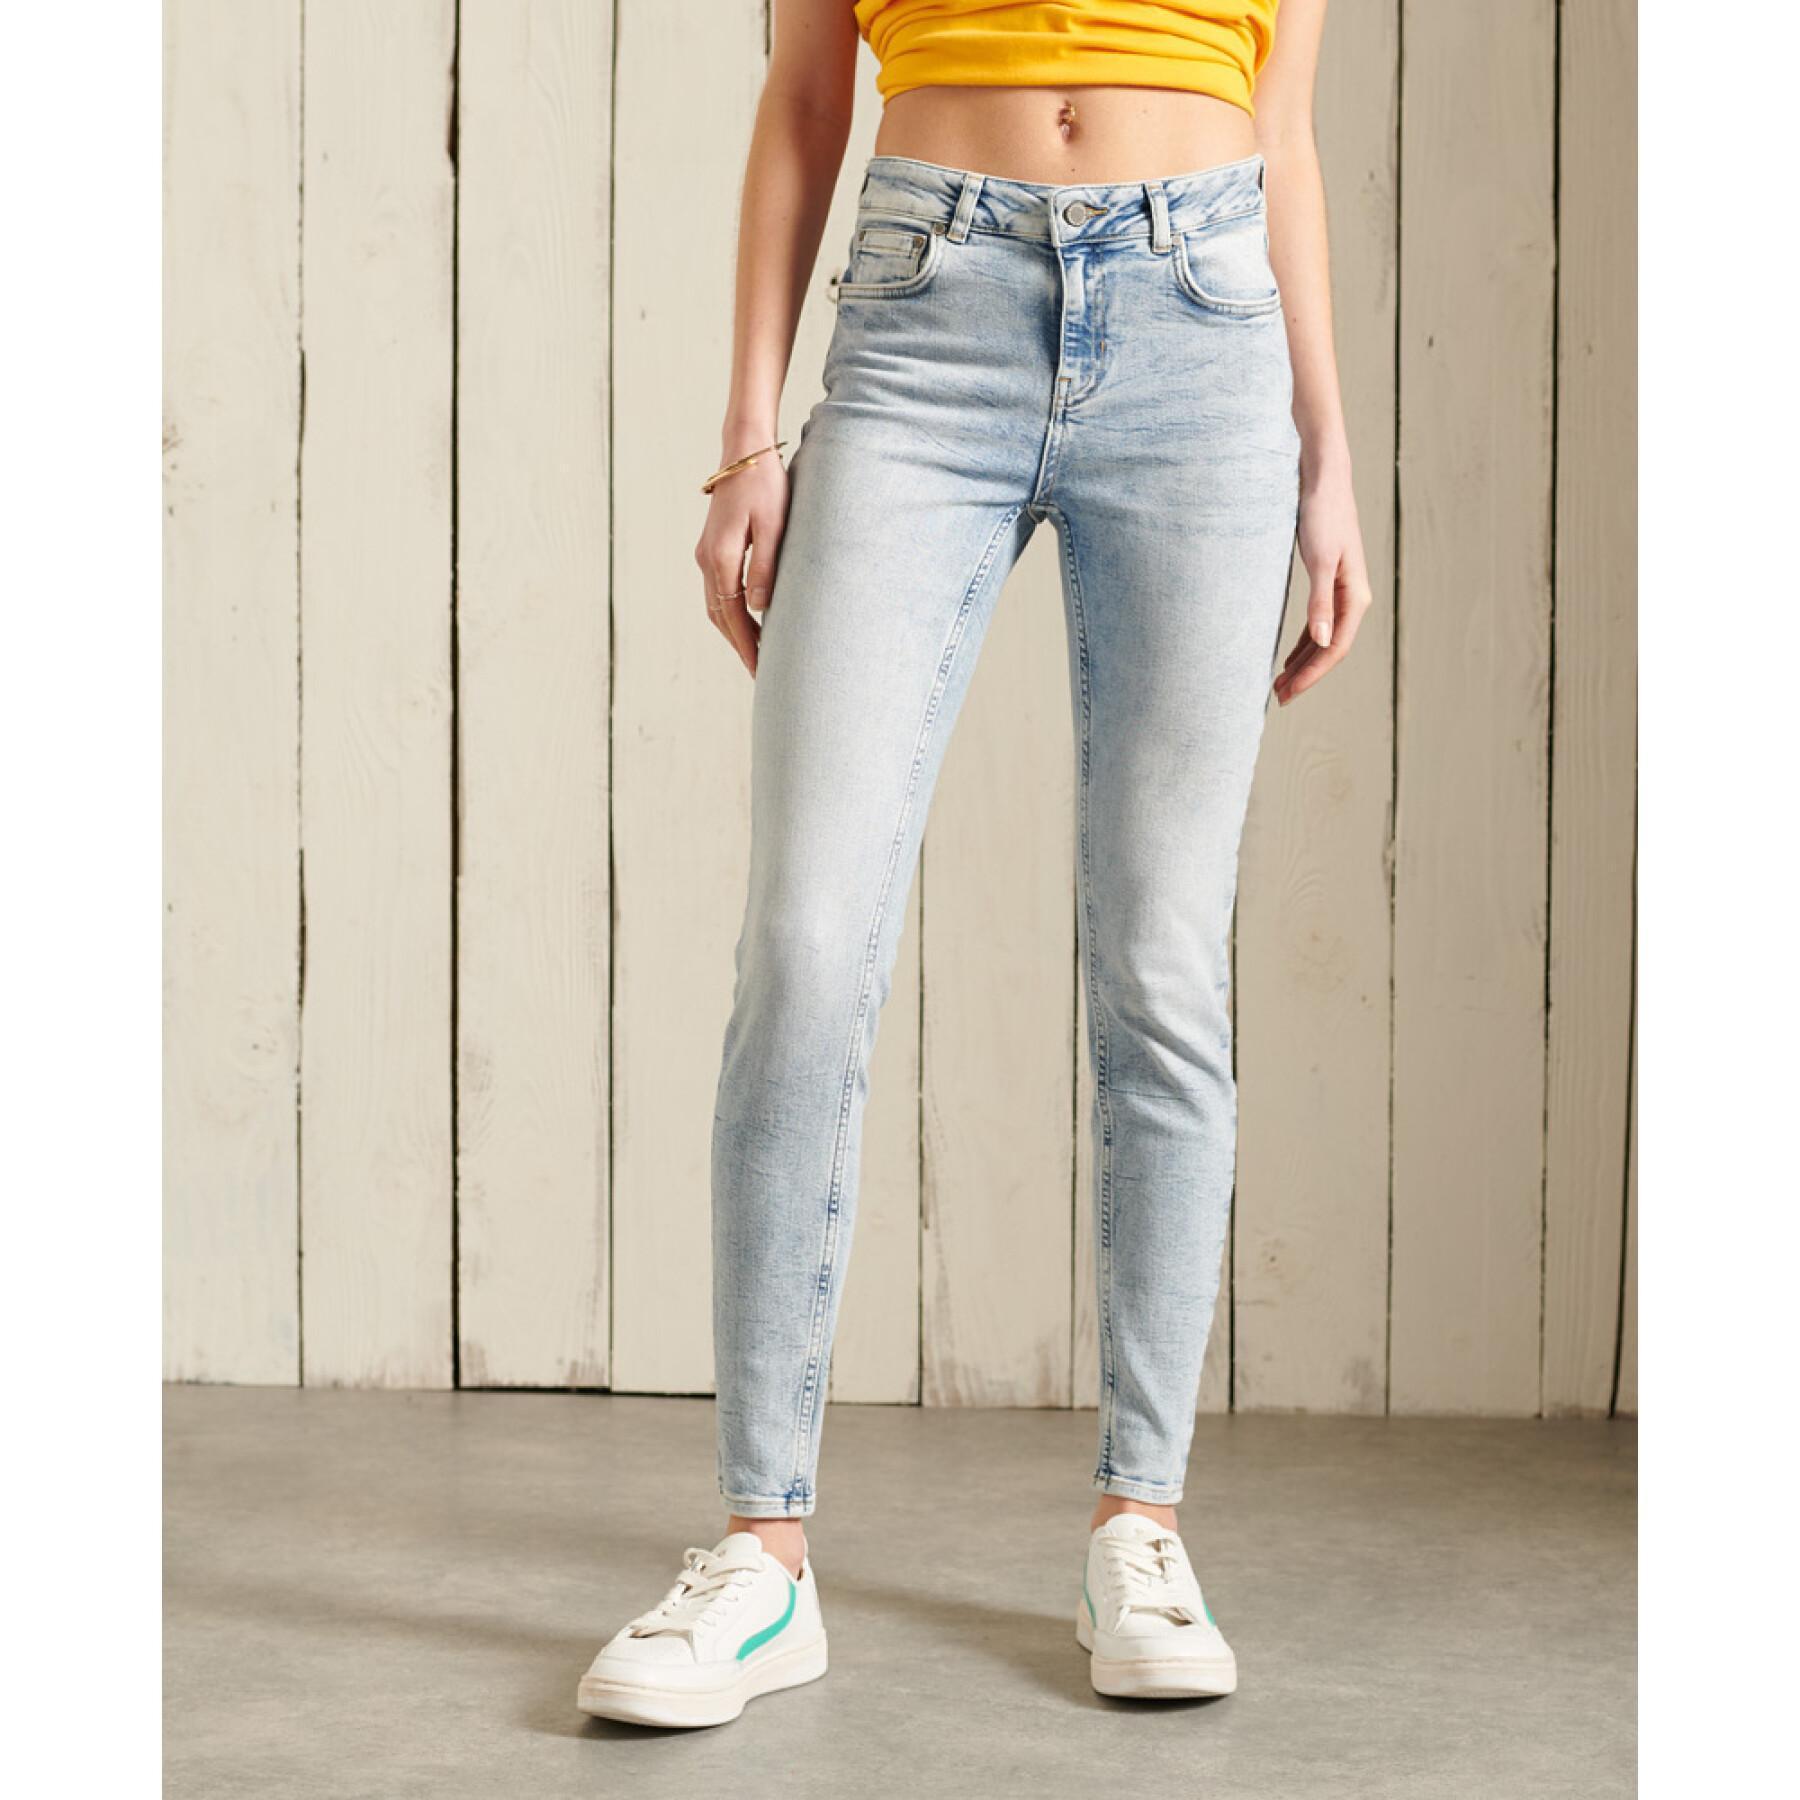 Women's mid-rise skinny jeans Superdry